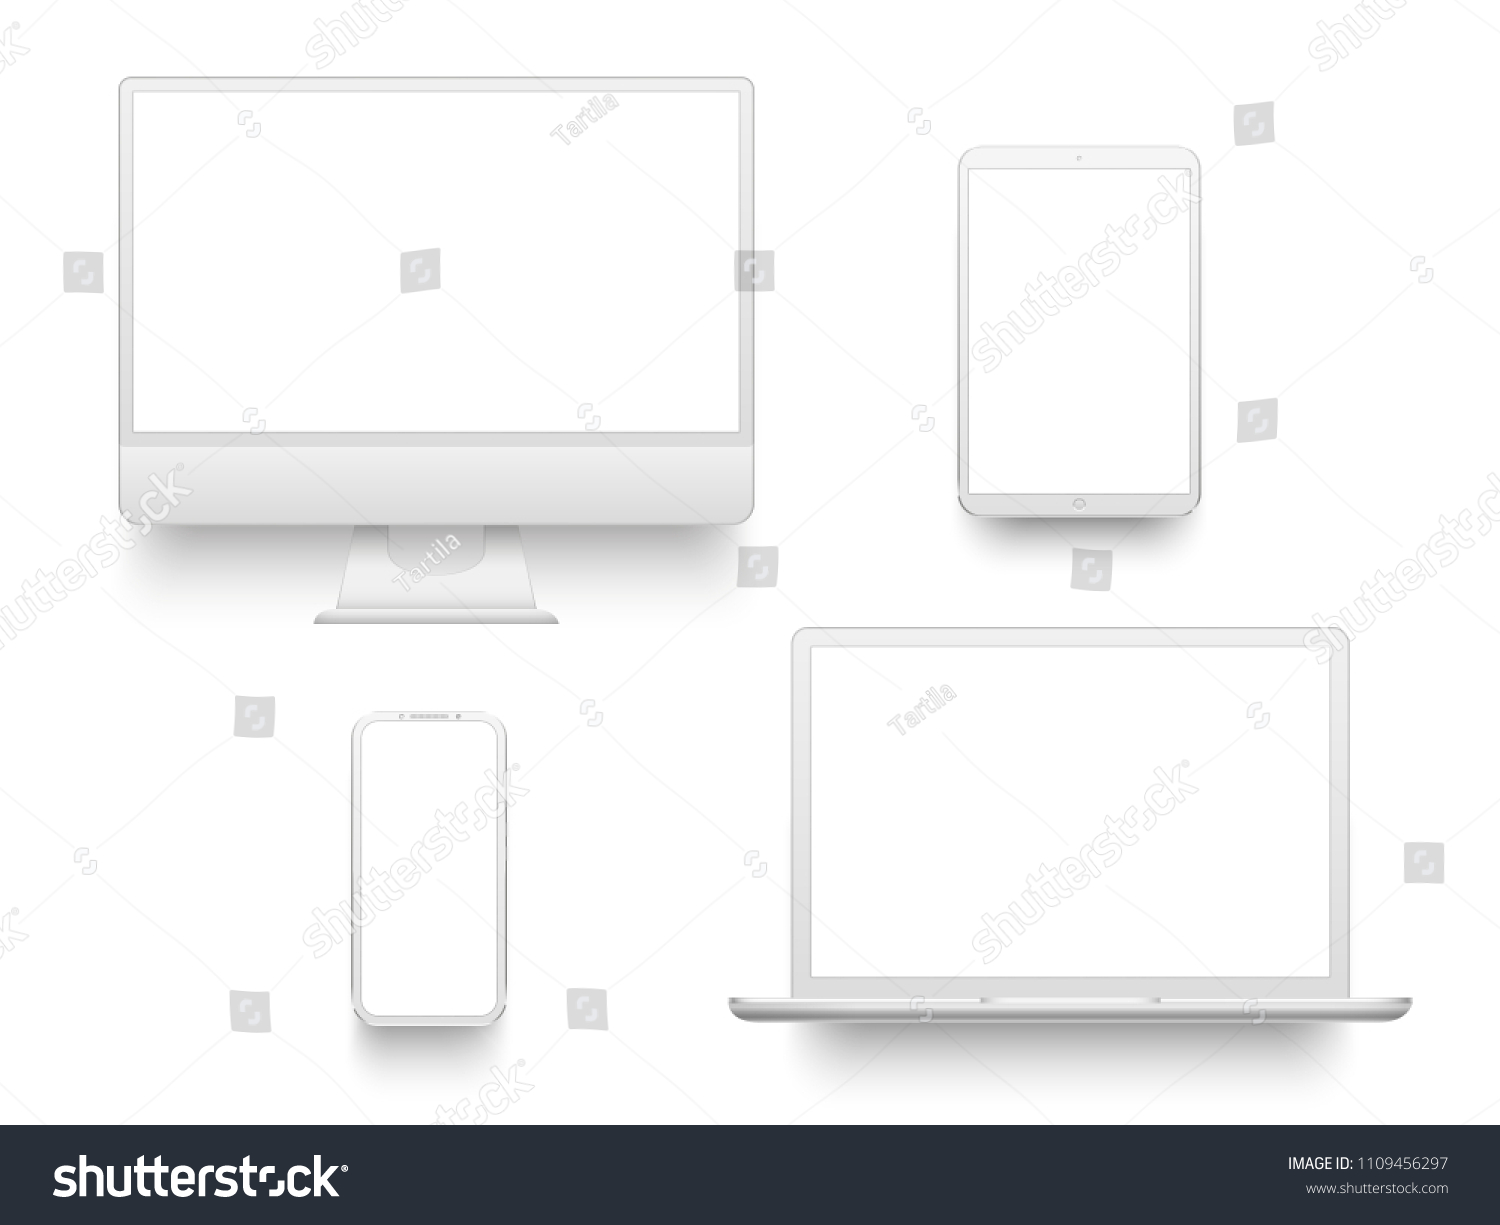 White desktop computer display screen smartphone tablet portable notebook or laptop. Outline mockup electronics devices phone monitor lines realistic simple isolated 3d vector set #1109456297